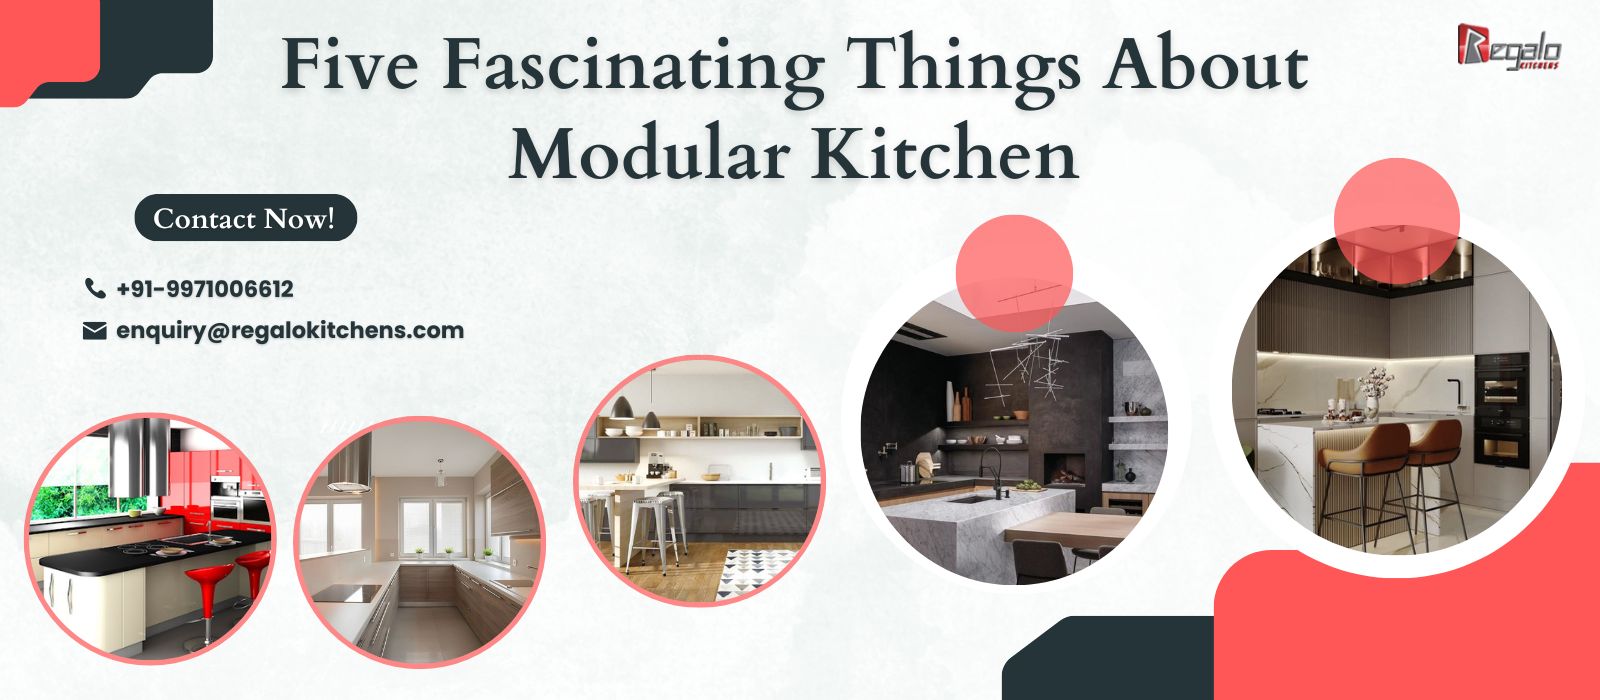 Five Fascinating Things About Modular Kitchen